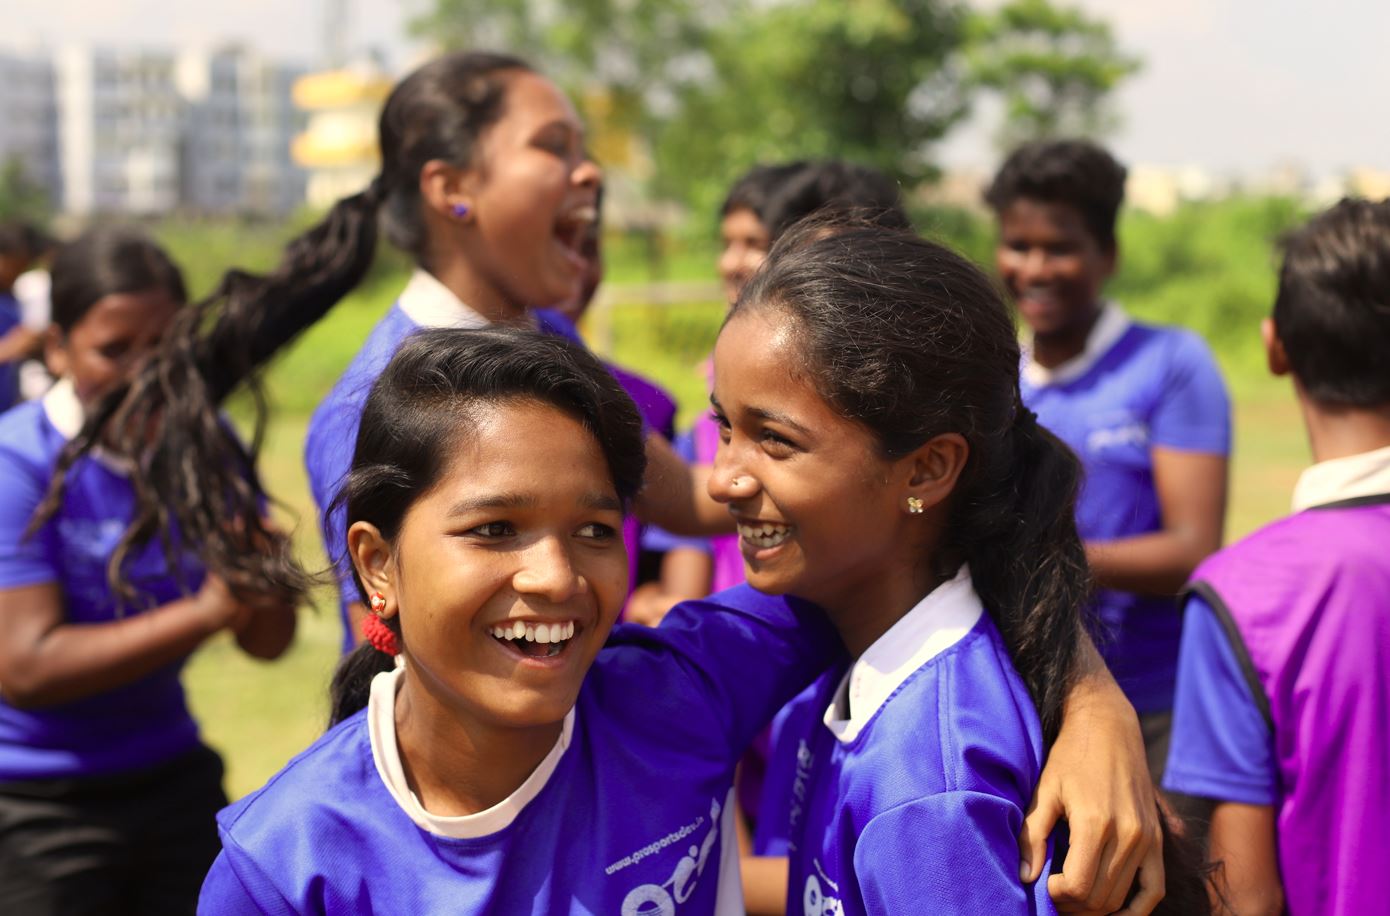 Pro Sport Development helps youth fight gender norms through sports.